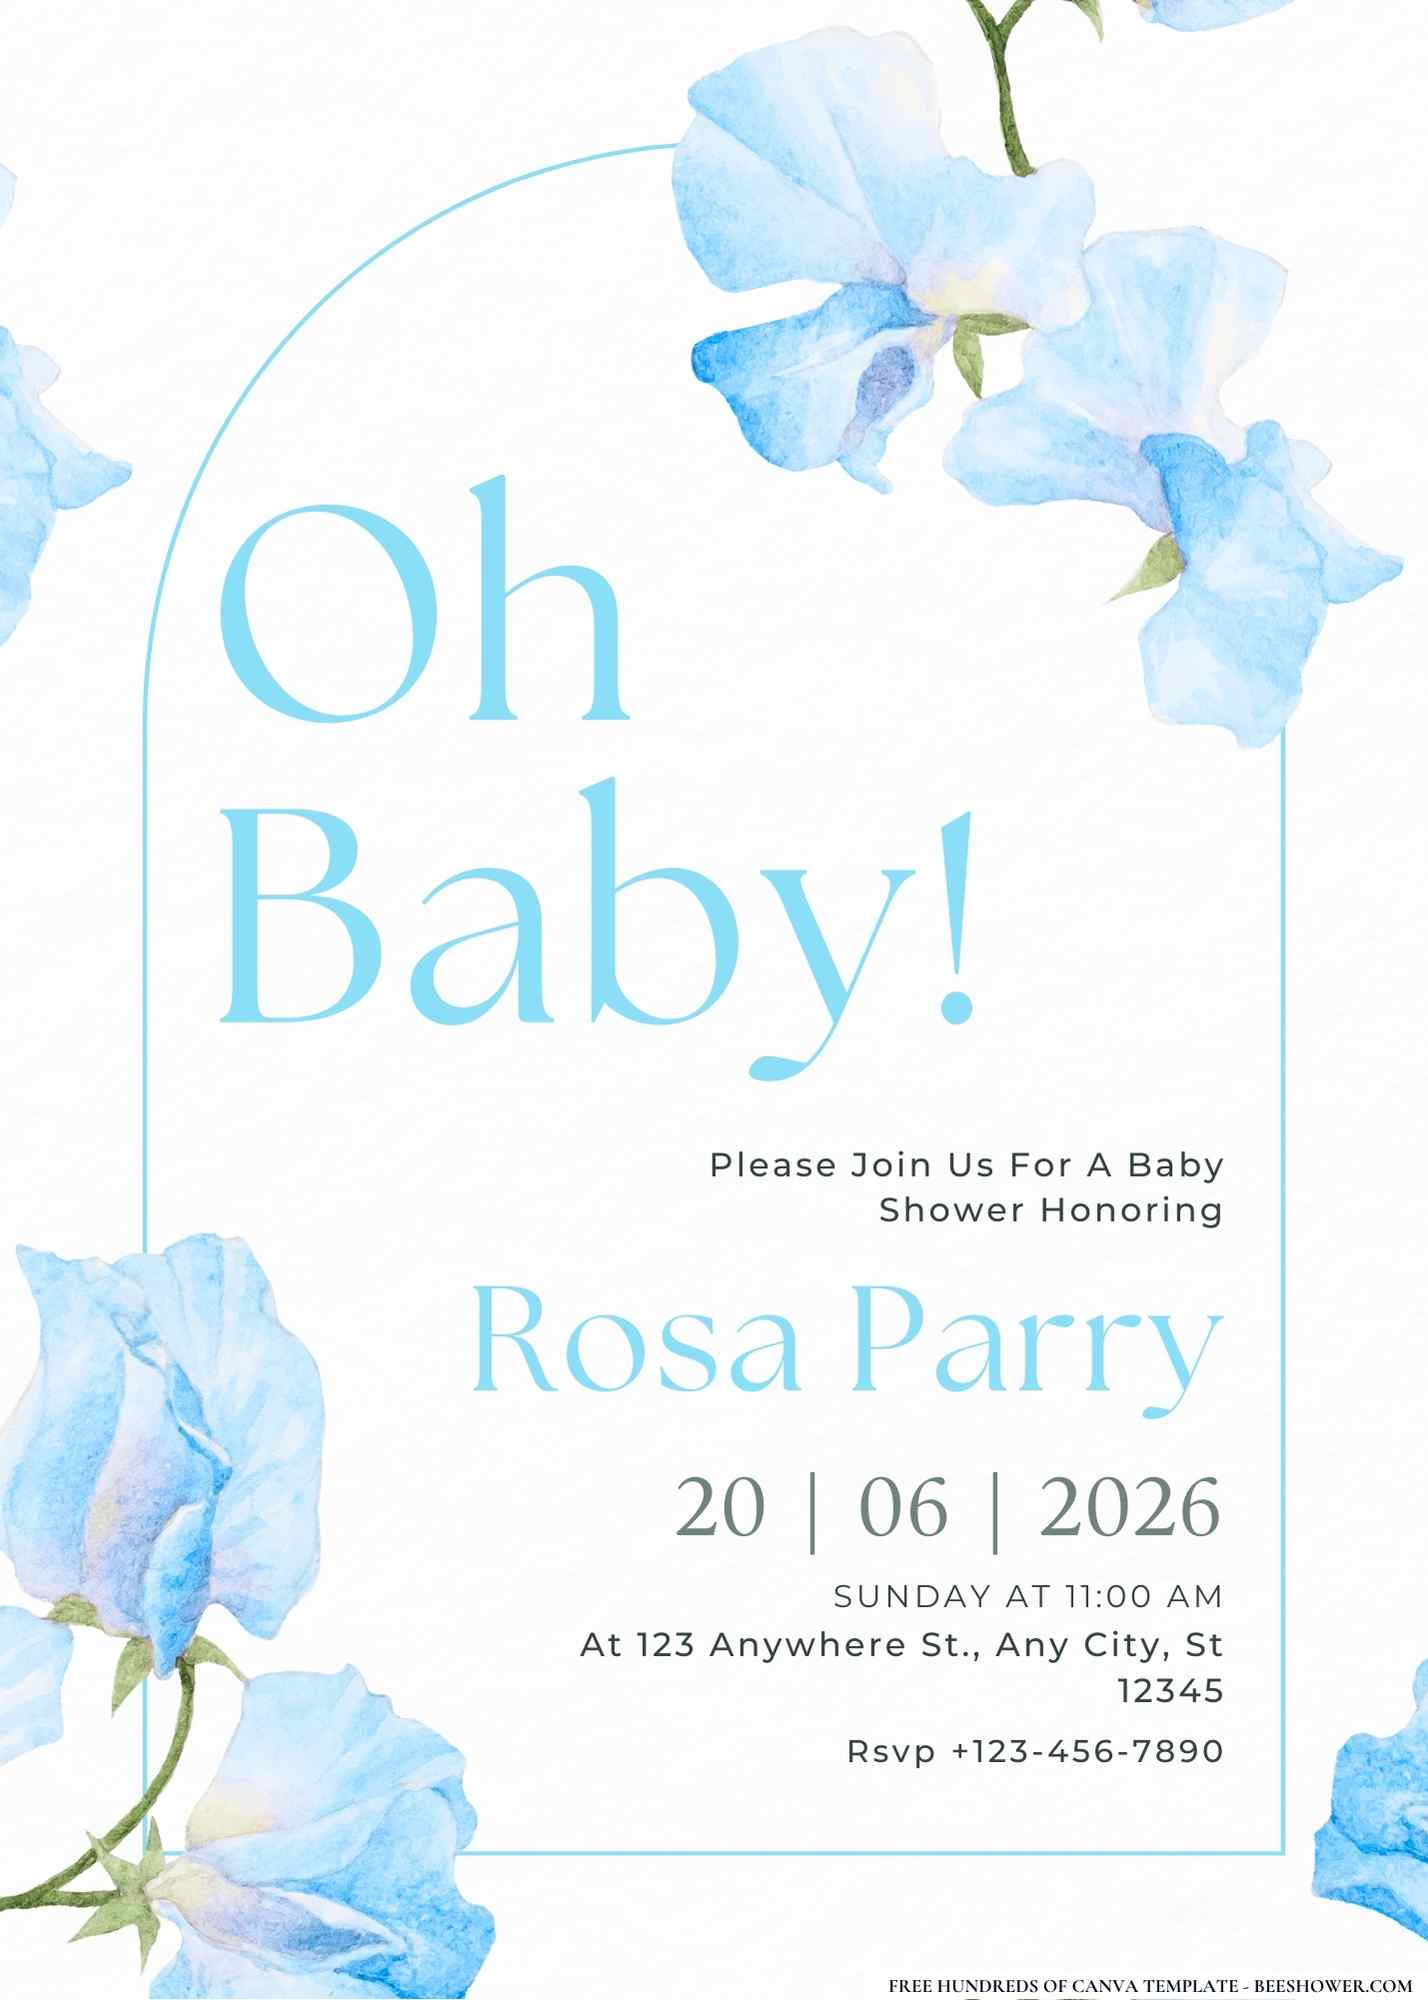 Sweet Pea's Arrival Baby Shower Invitation